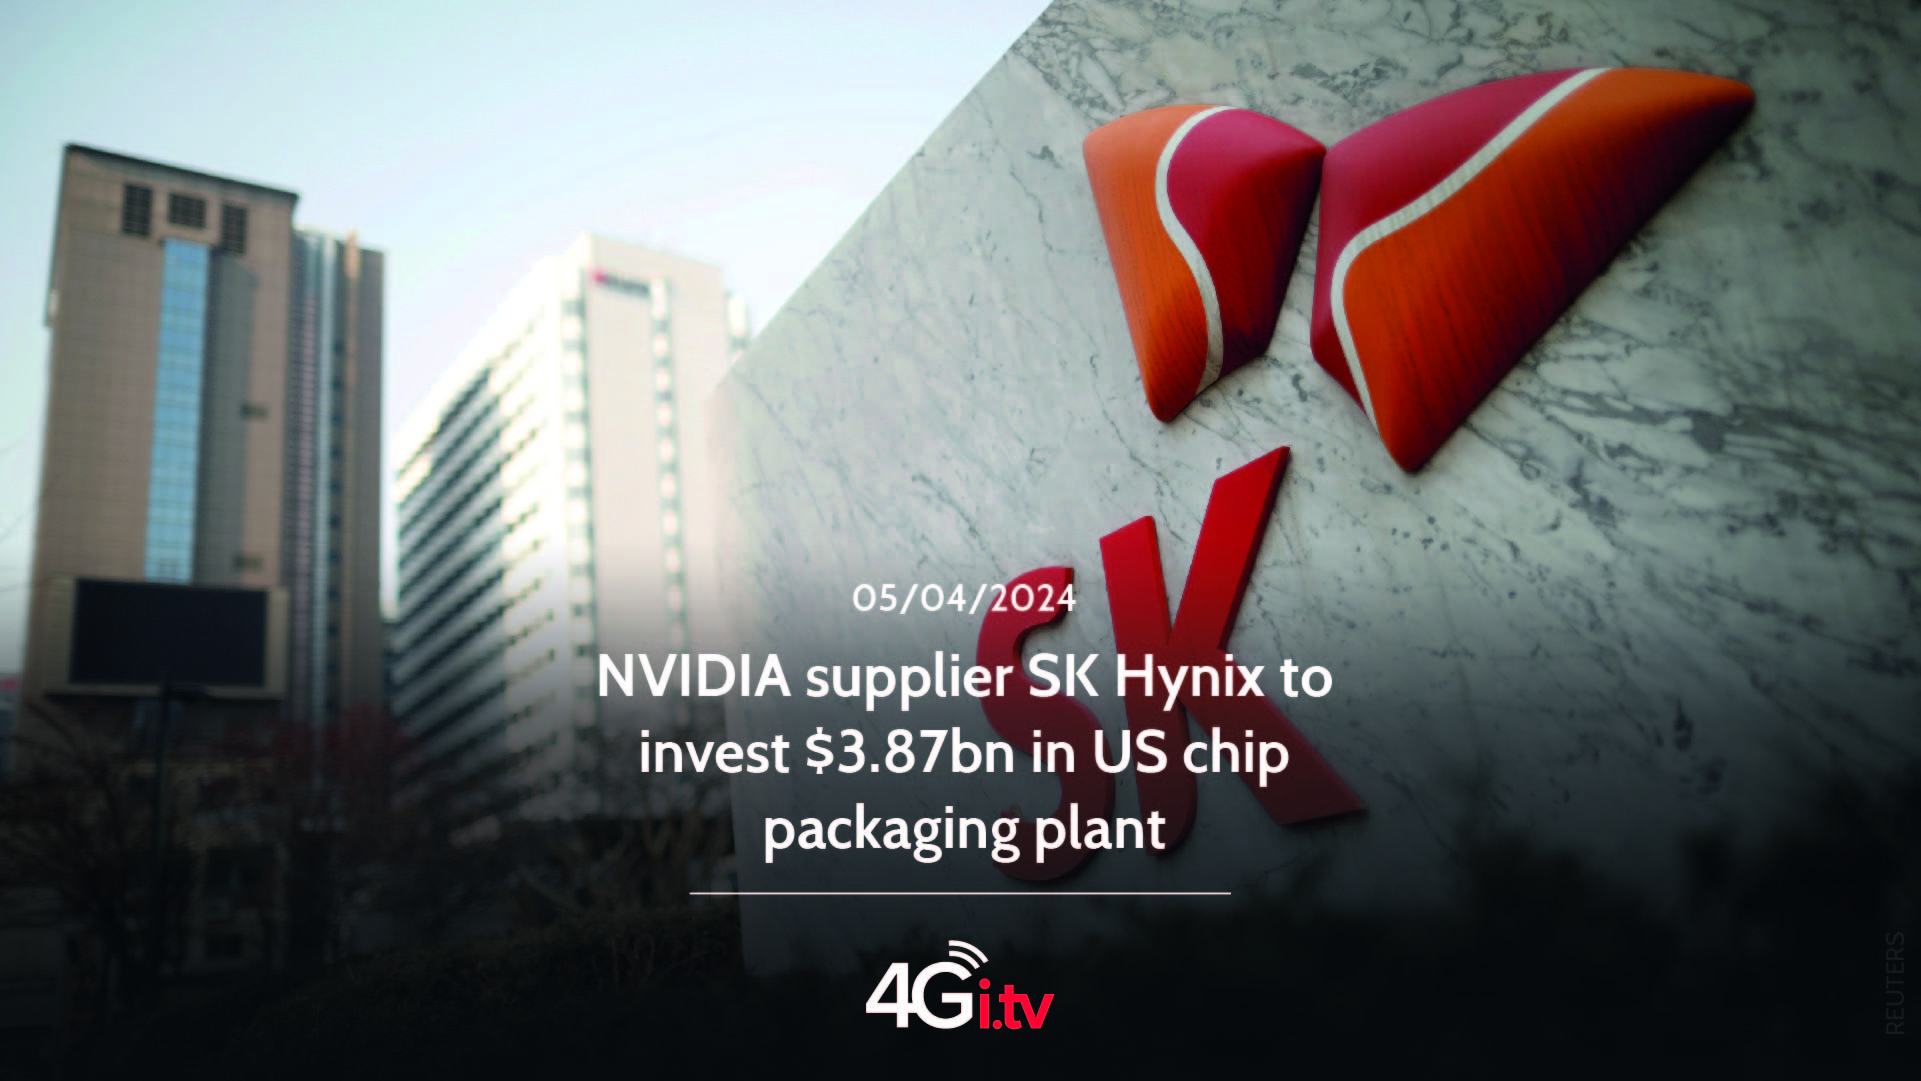 Подробнее о статье NVIDIA supplier SK Hynix to invest $3.87bn in US chip packaging plant